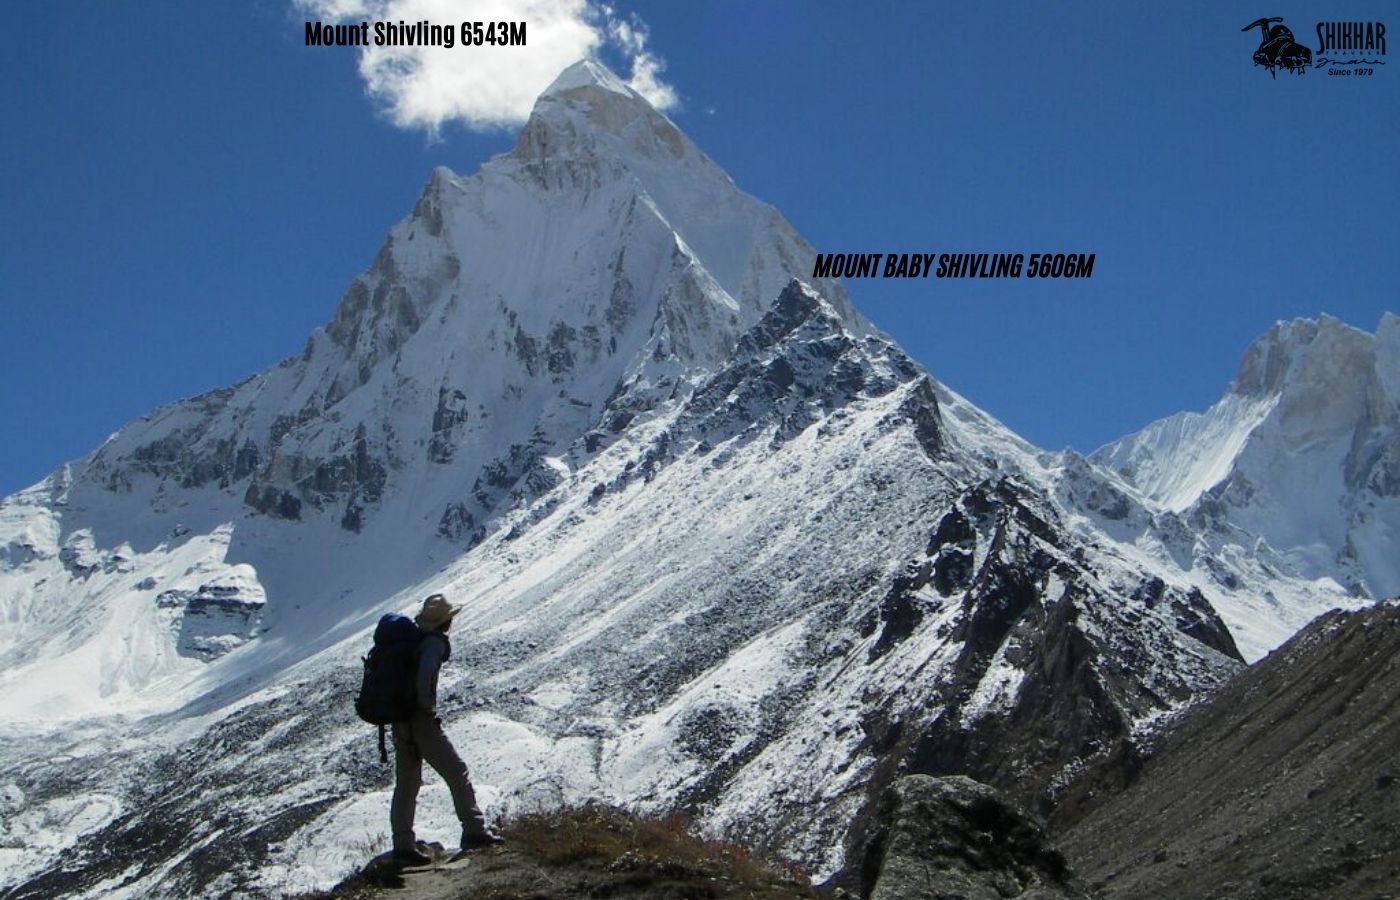 Basic Mountaineering Course - Introduction to Mountaineering